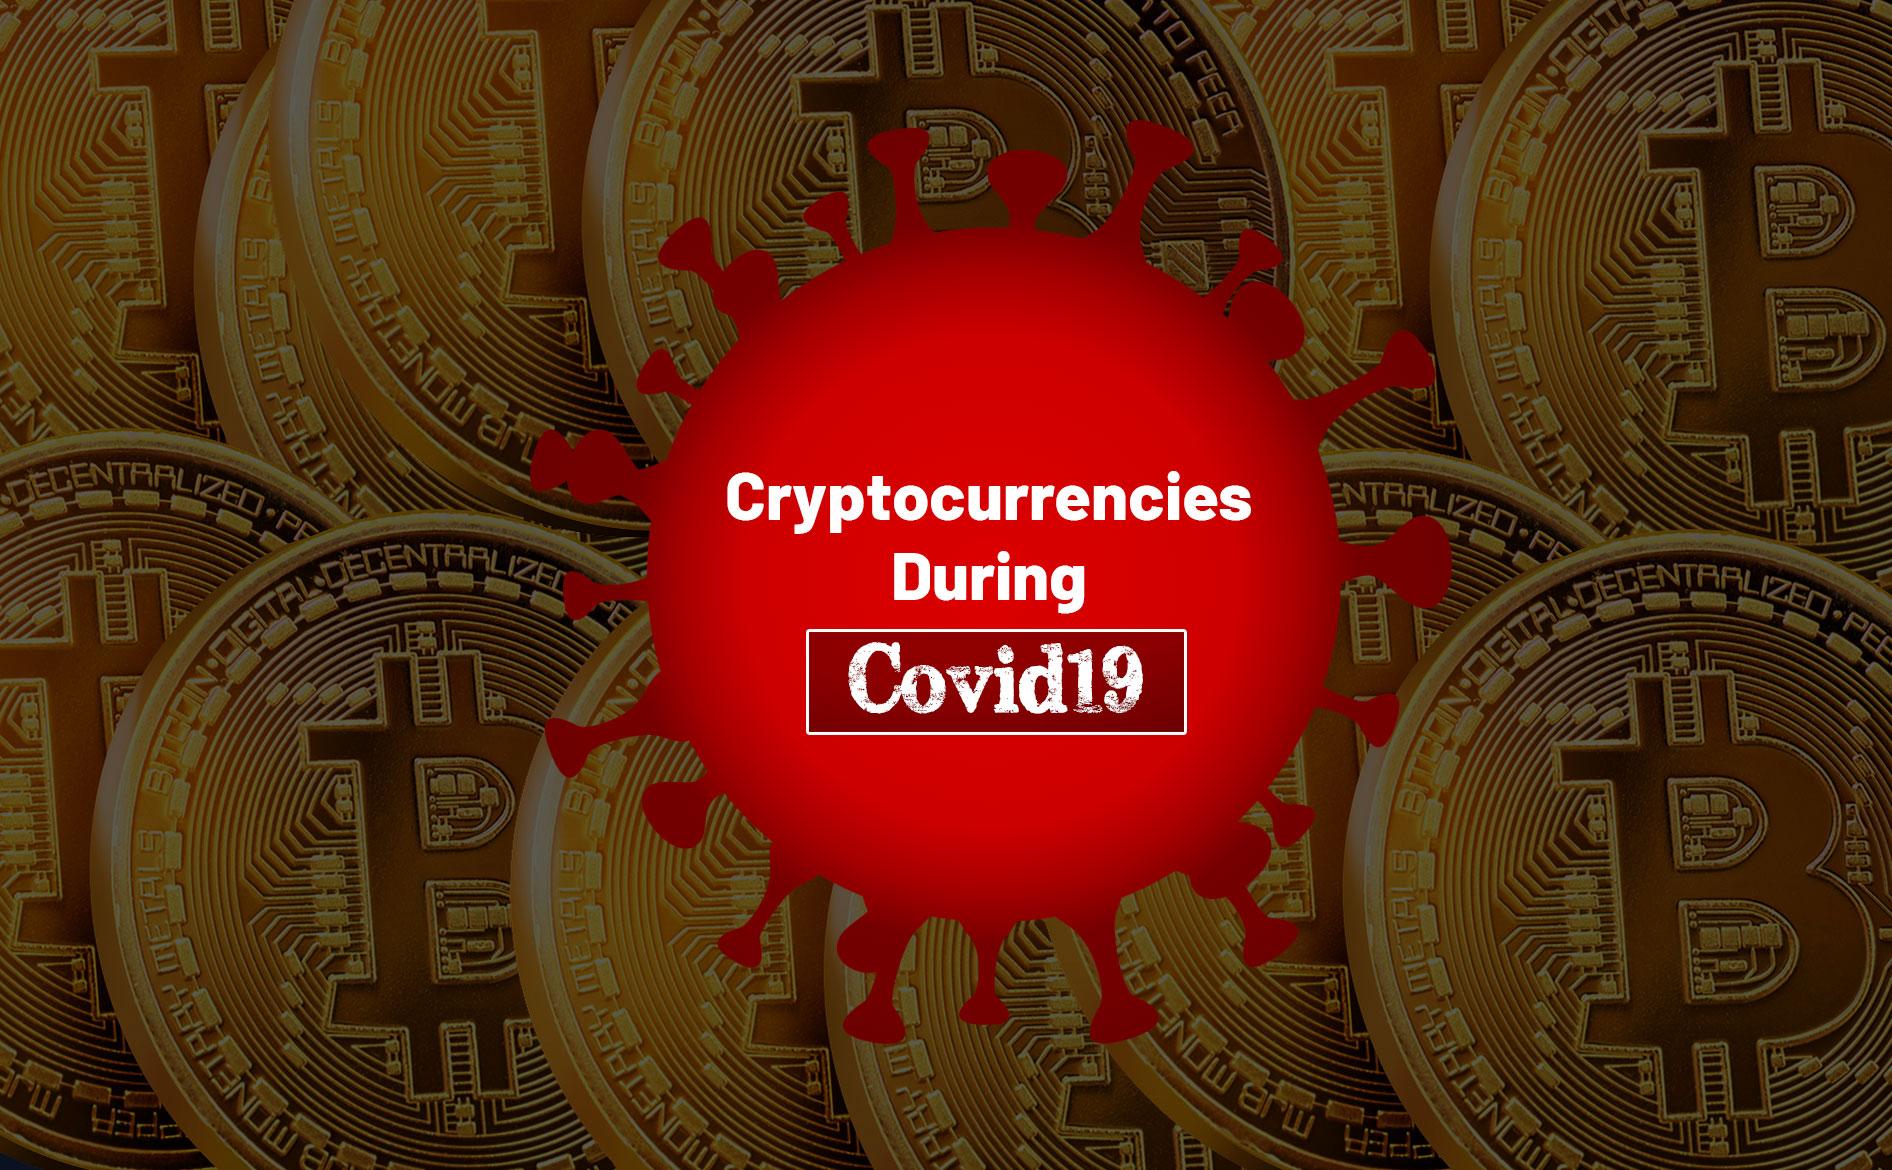 Cryptocurrencies during Covid19